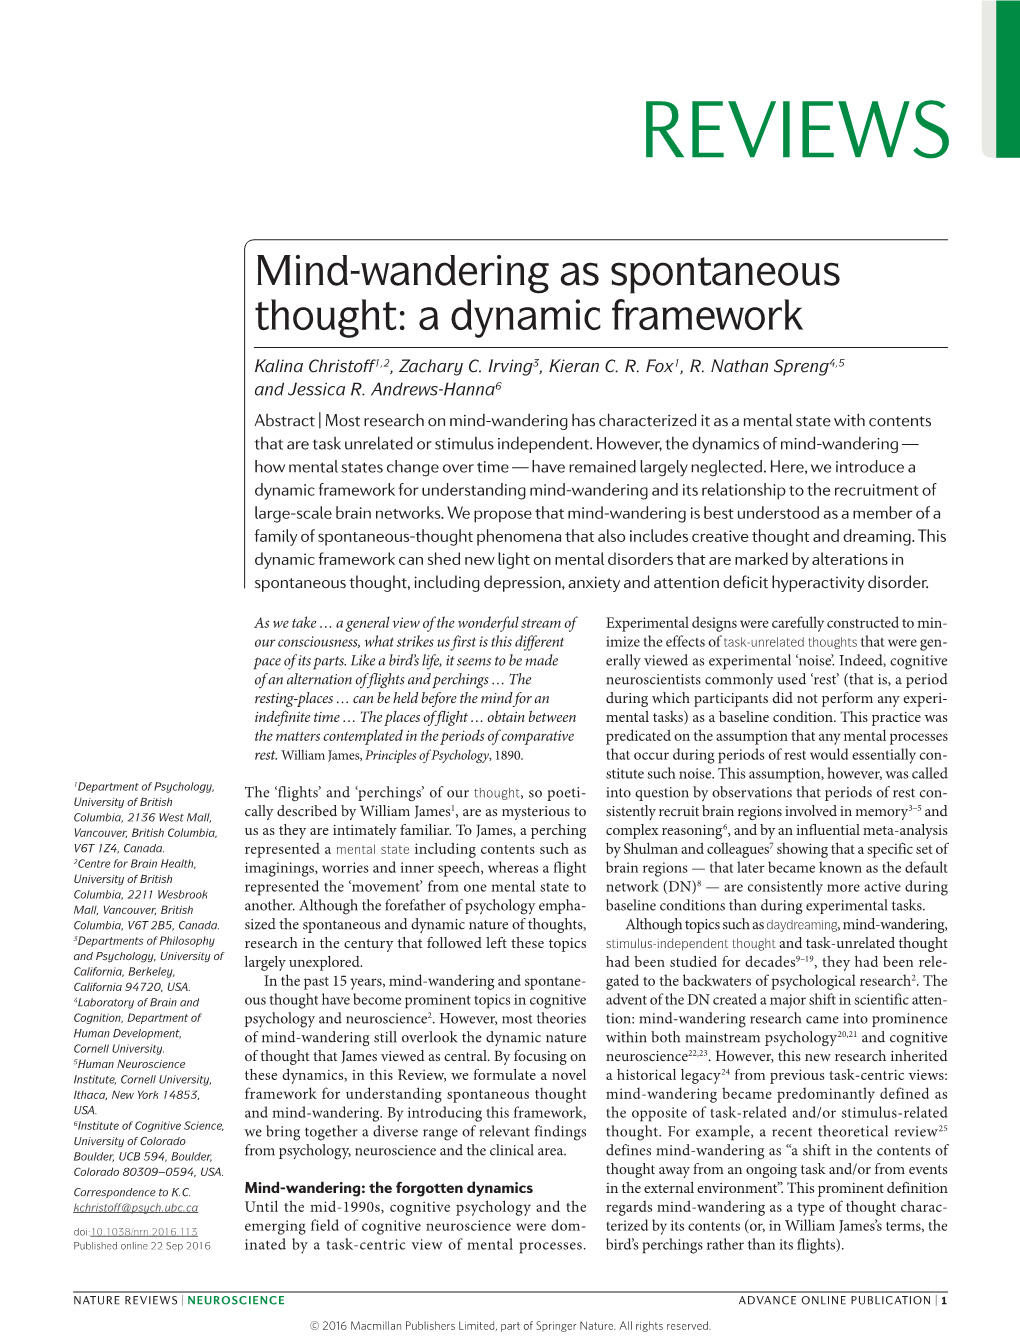 Mind-Wandering As Spontaneous Thought: a Dynamic Framework